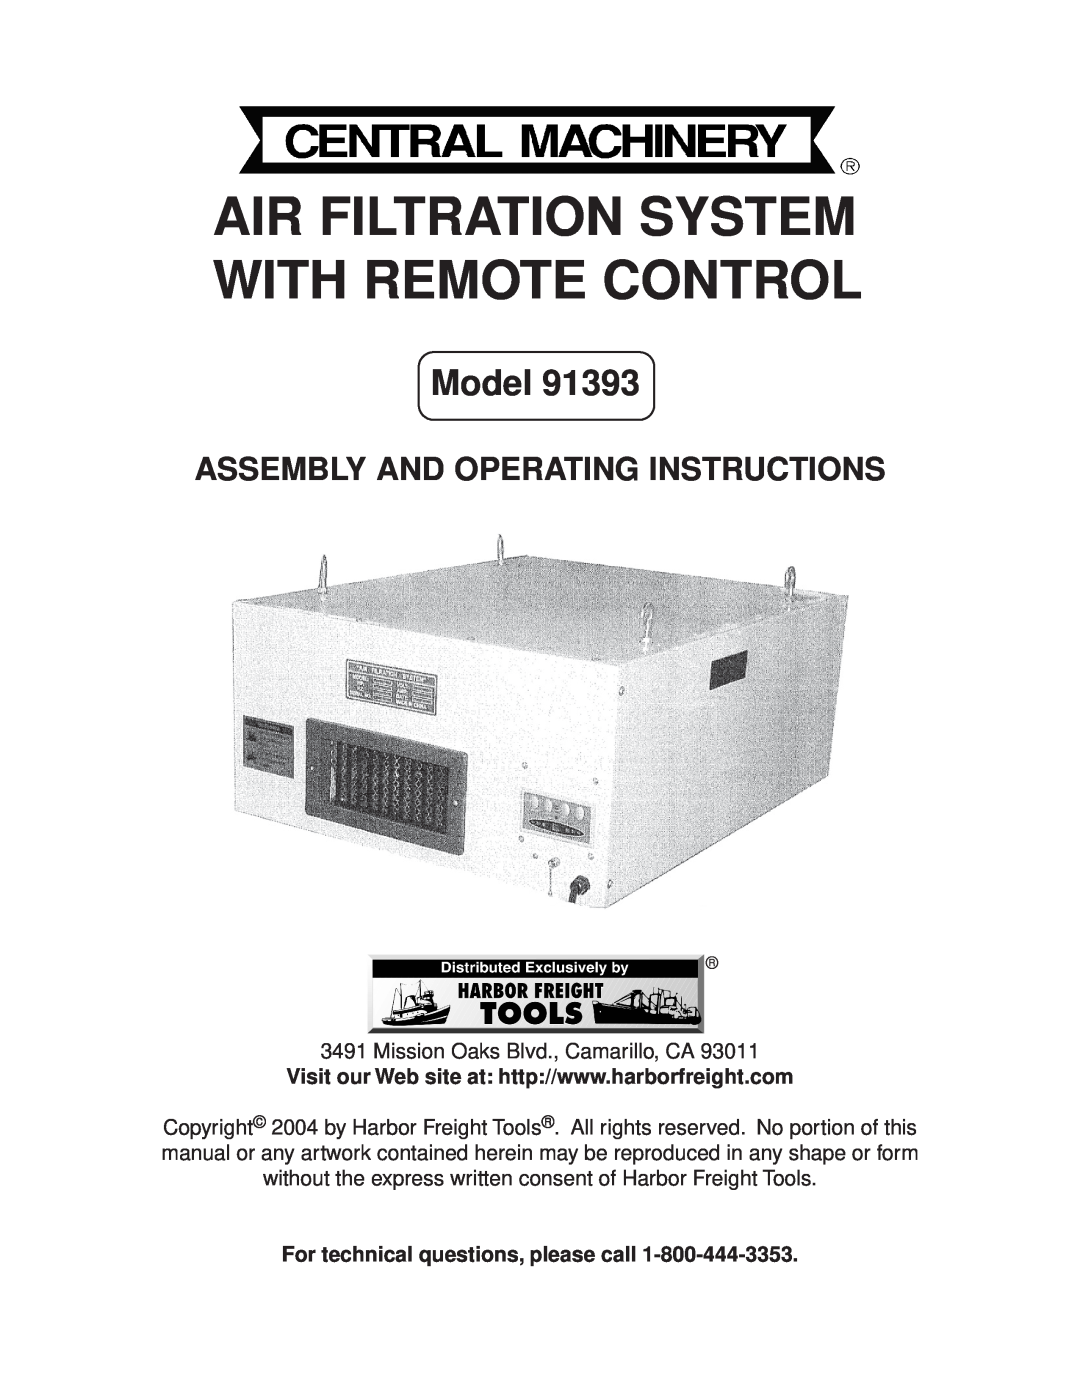 Harbor Freight Tools 91393 manual Air Filtration System With Remote Control, Model, Assembly And Operating Instructions 